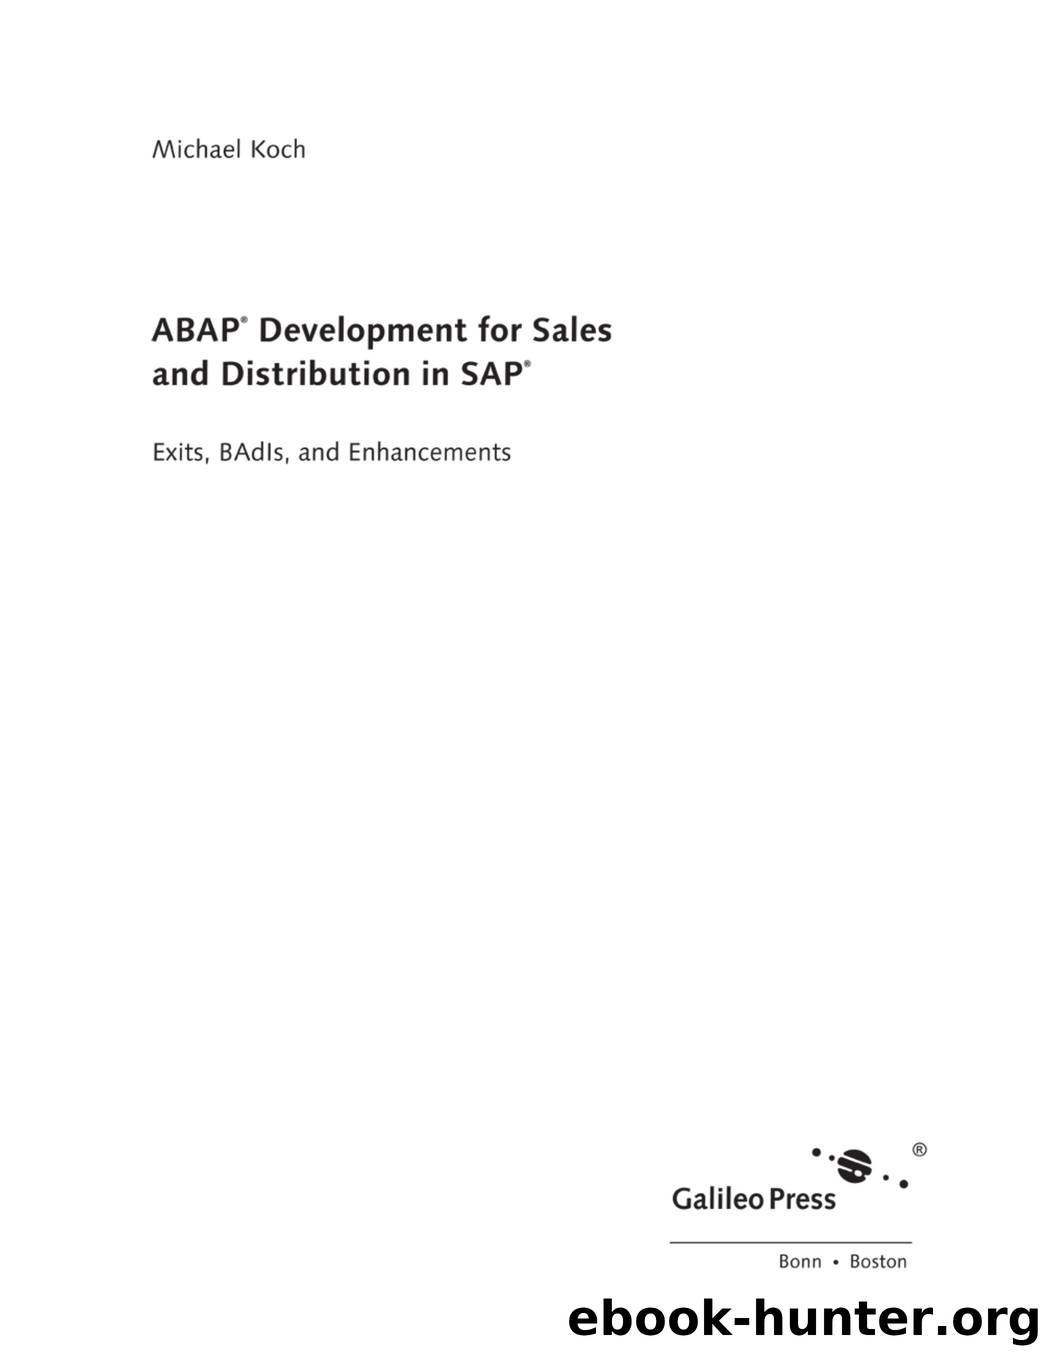 ABAP Development for Sales and Distribution in SAP by Unknown